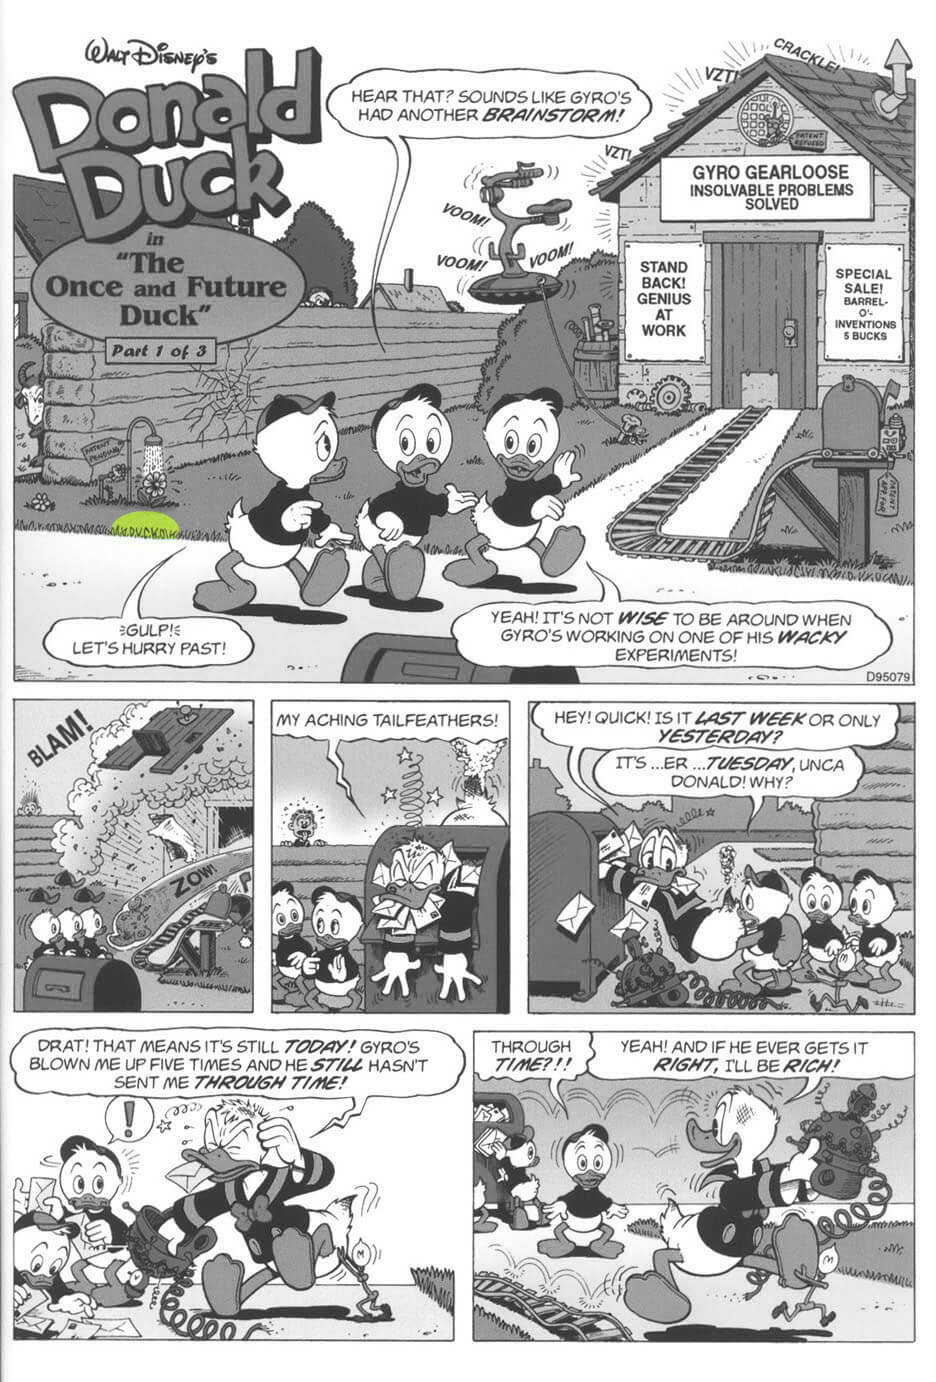 D.U.C.K in The Once and Future Duck first page